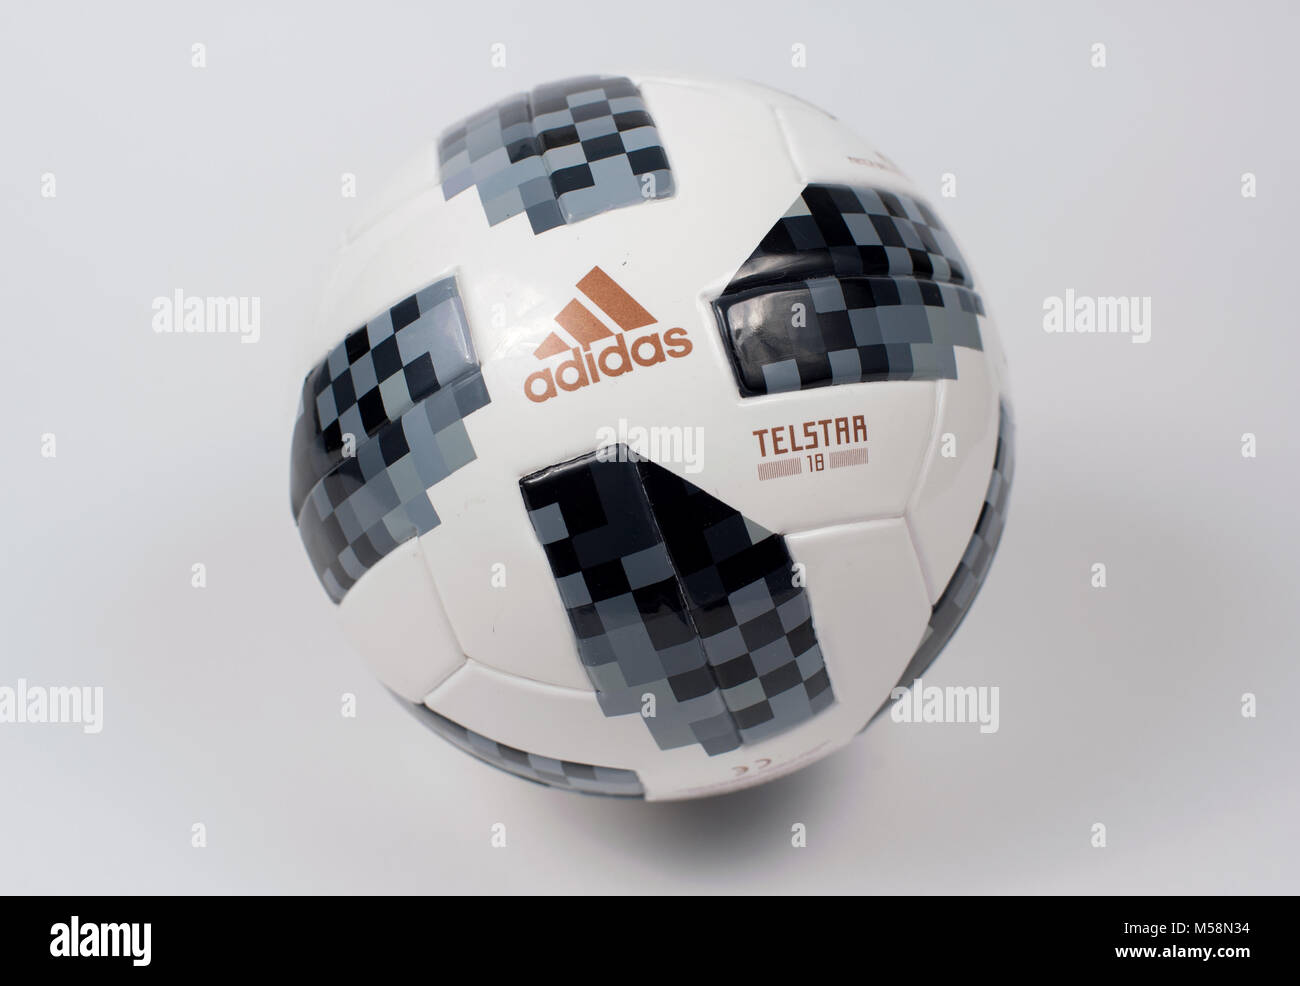 2 Dec 2017 Moscow, Russia The official ball of FIFA World Cup 2018 Adidas  Telstar 18 Stock Photo - Alamy